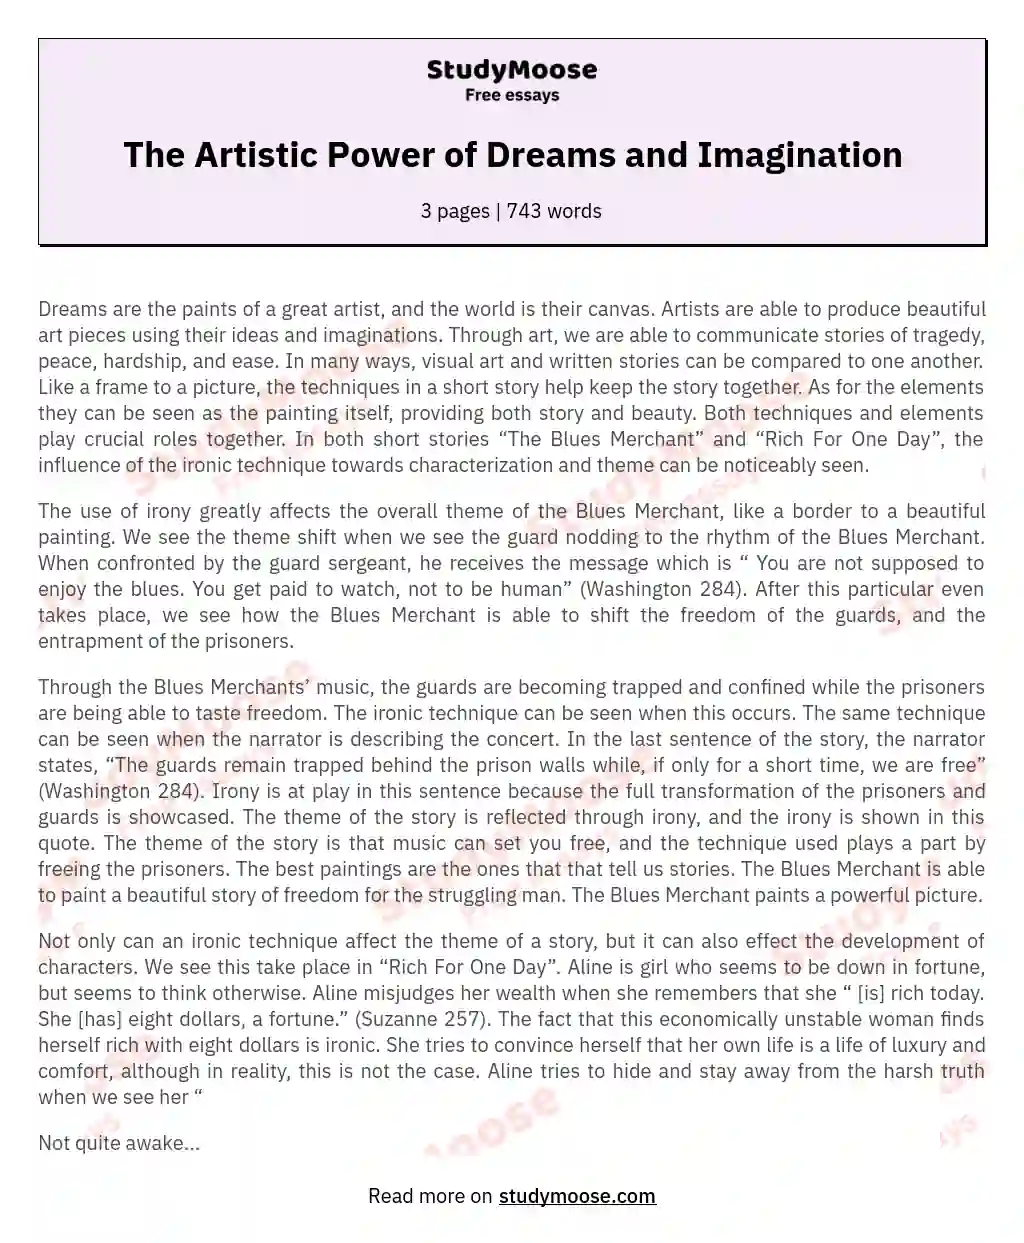 The Artistic Power of Dreams and Imagination essay